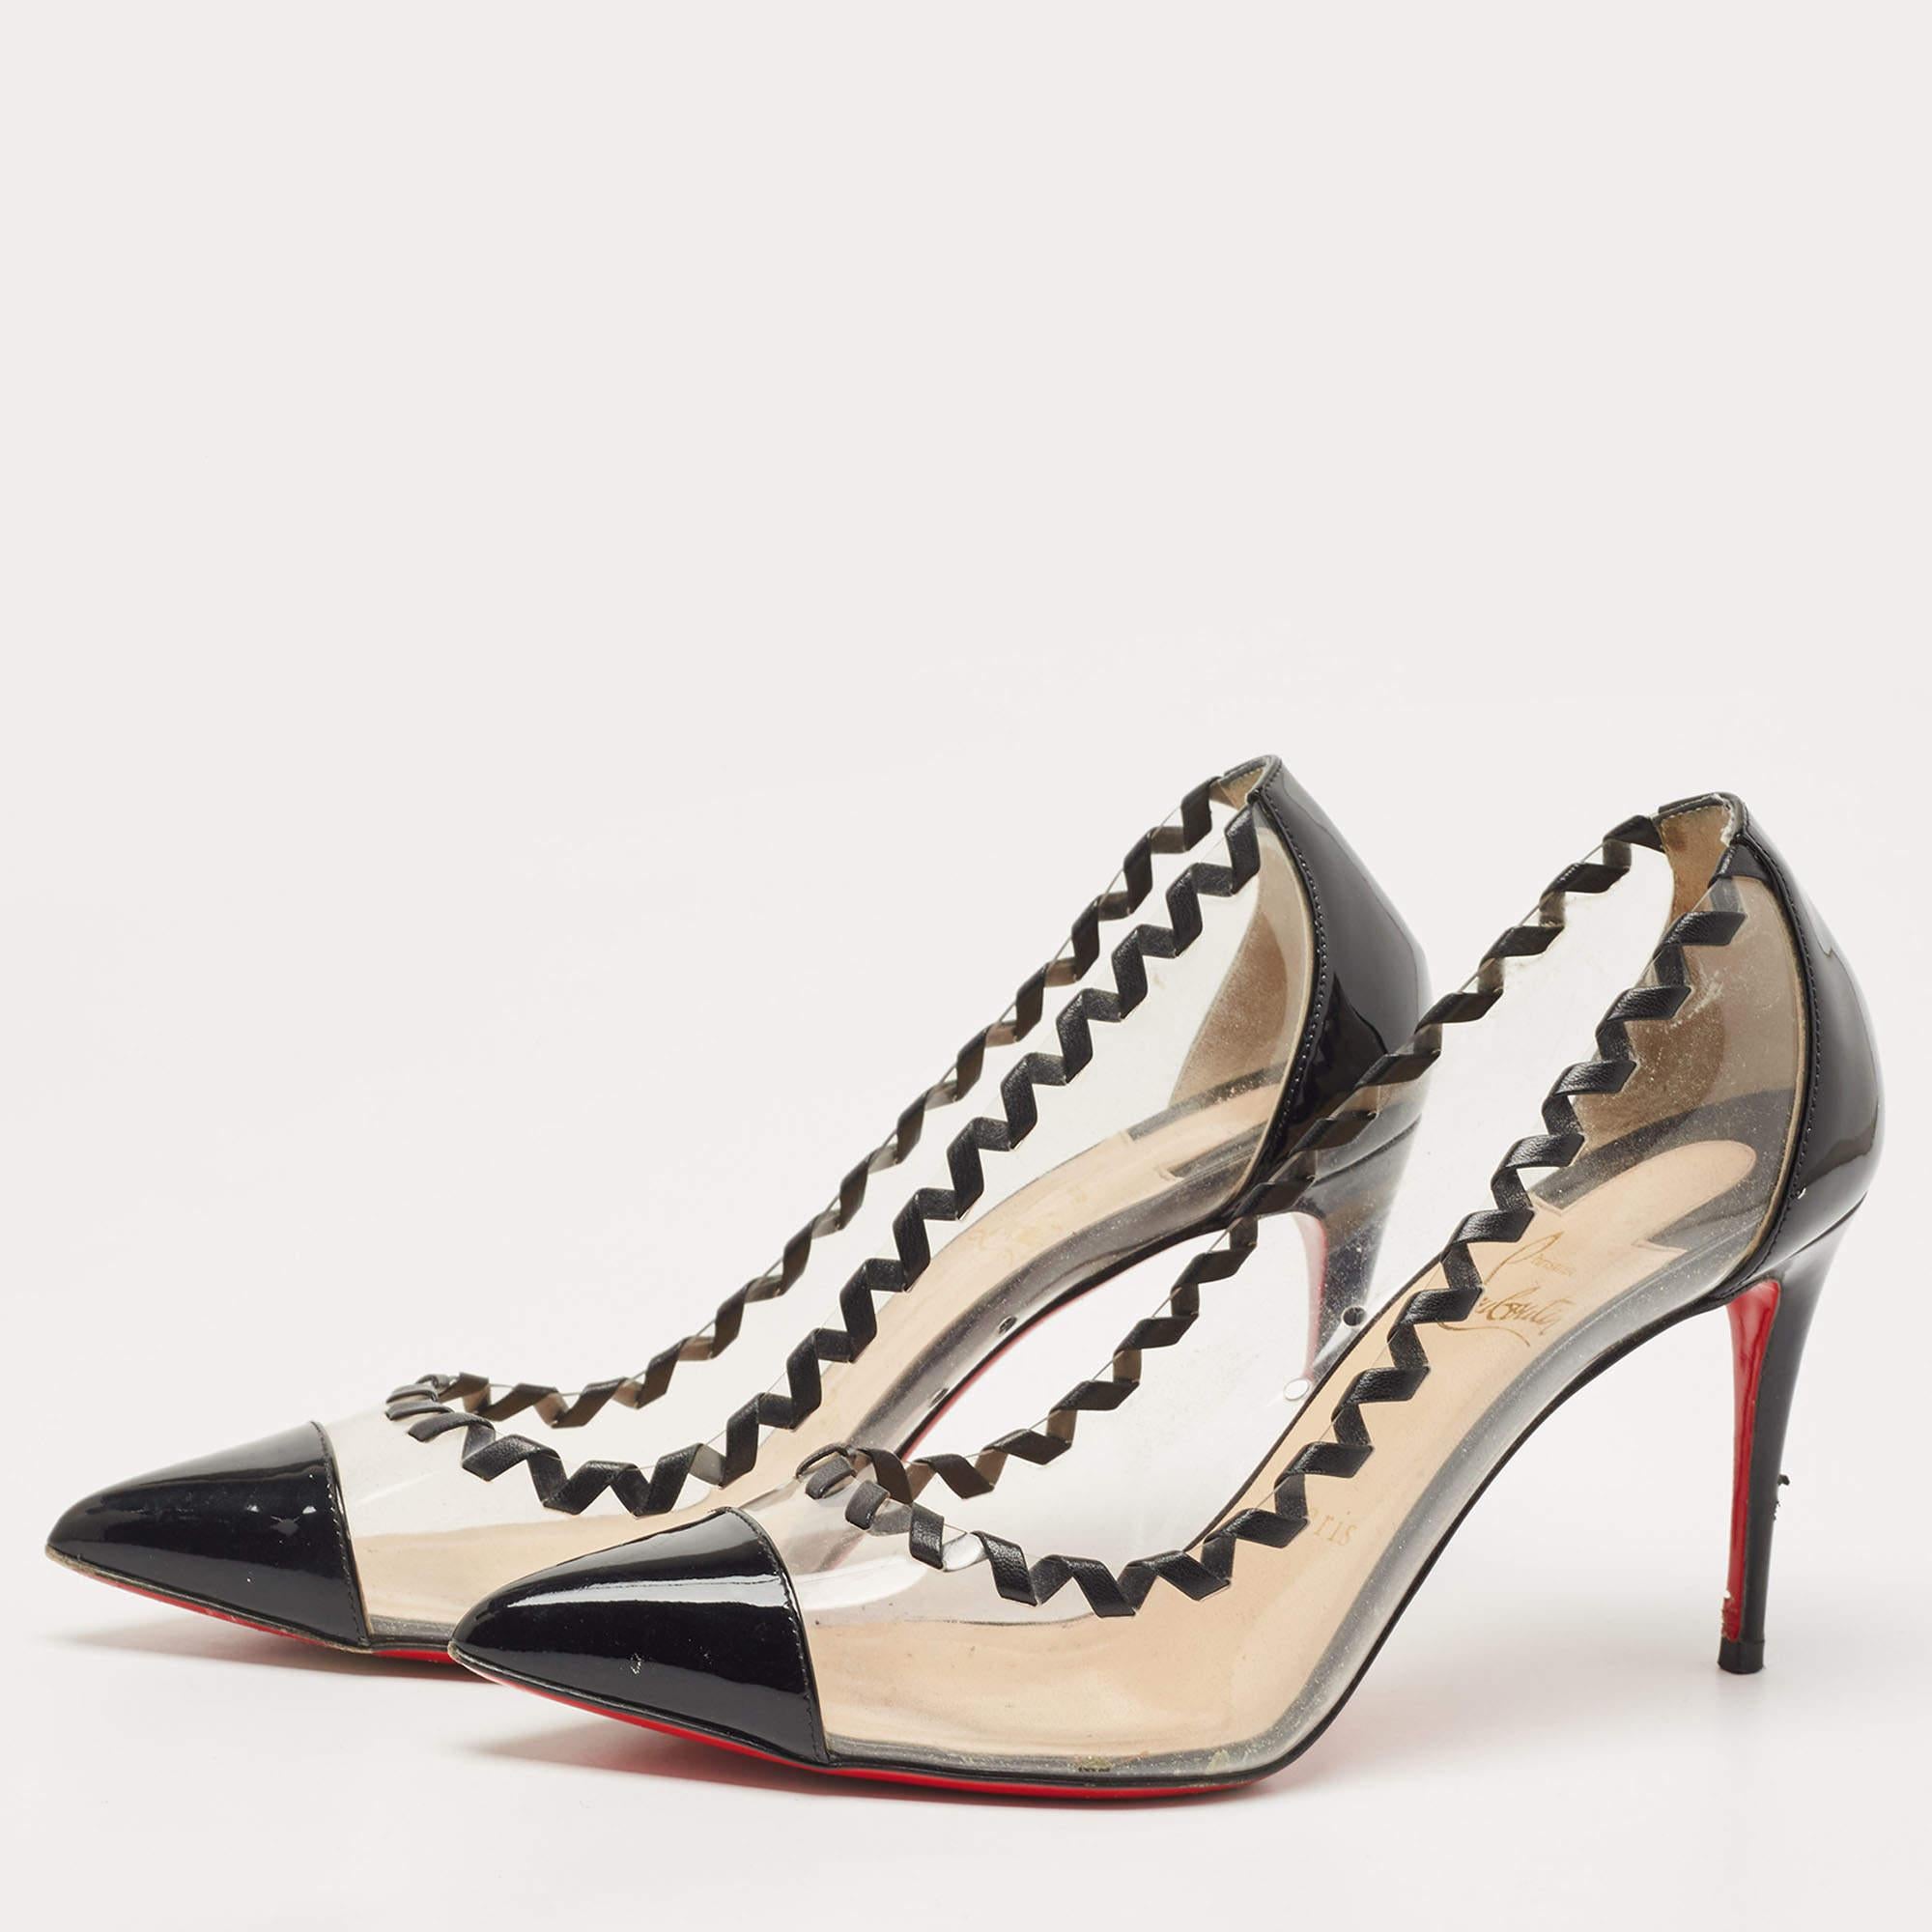 Look glamorous no matter what you wear with these beautiful pumps. These pumps are crafted from patent leather and clear PVC. These fashionable pumps from Christian Louboutin feature pointed toes, 9 cm heels and the iconic red soles.

